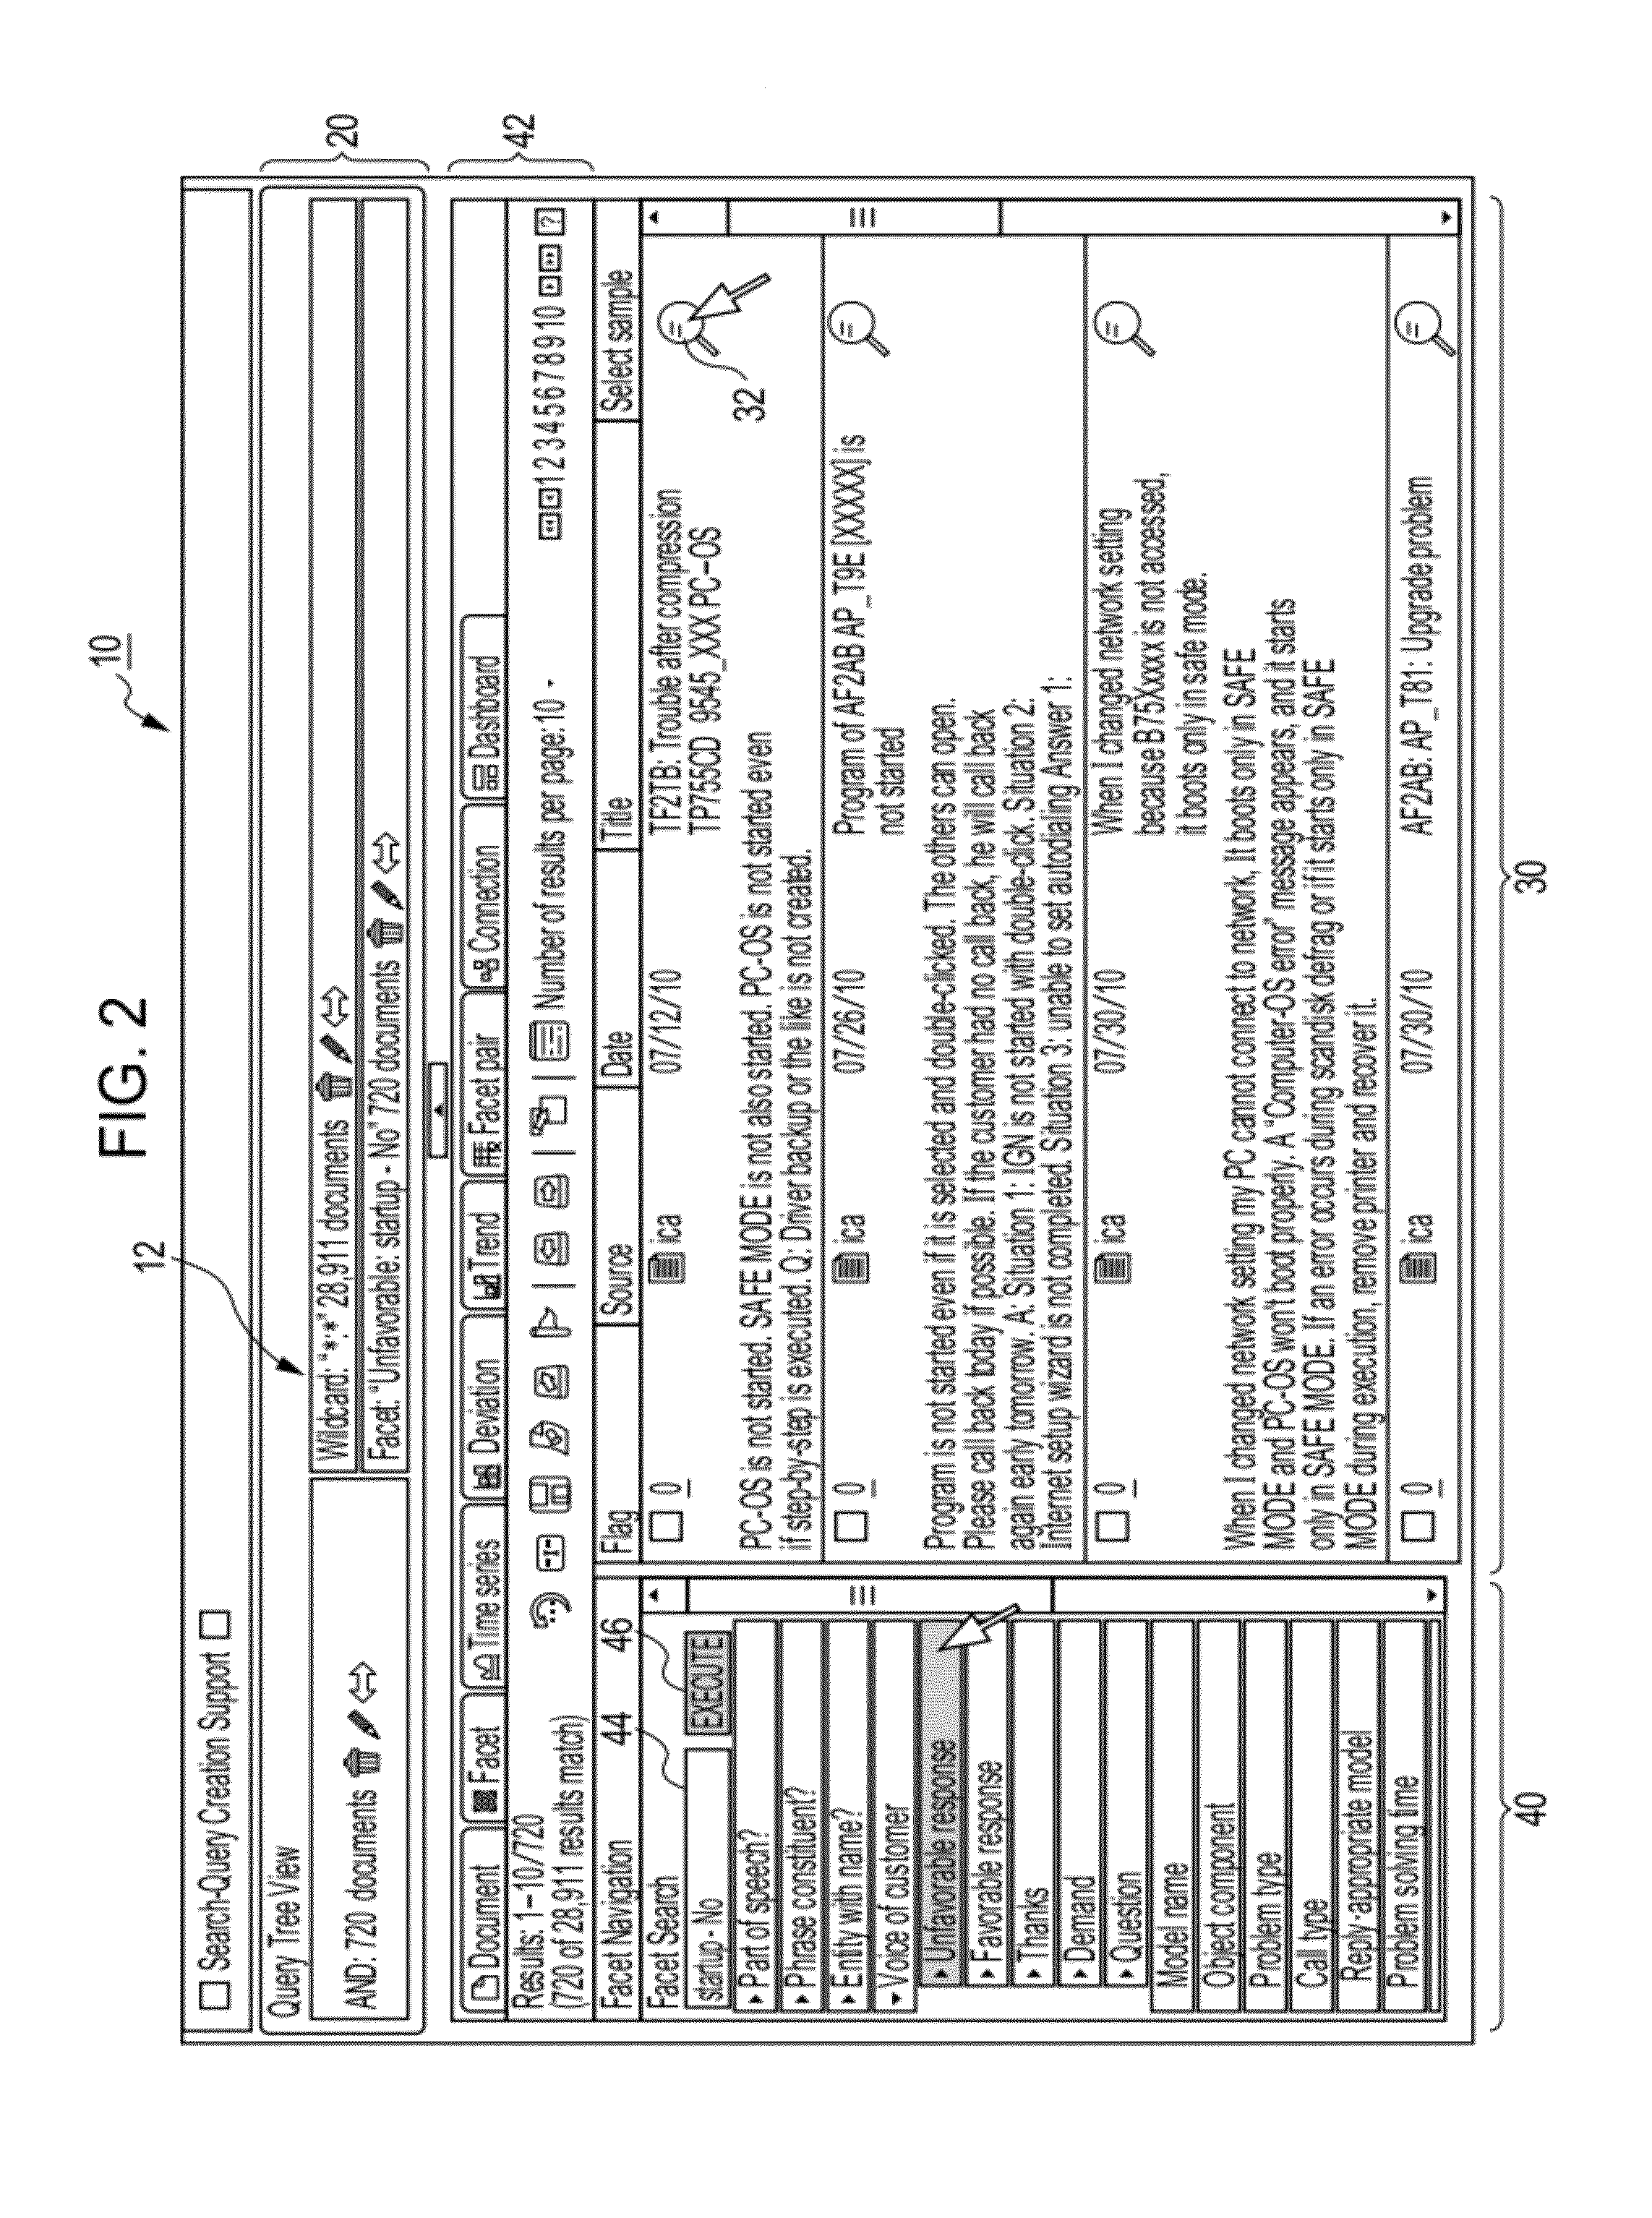 Graphical User Interface for a Search Query